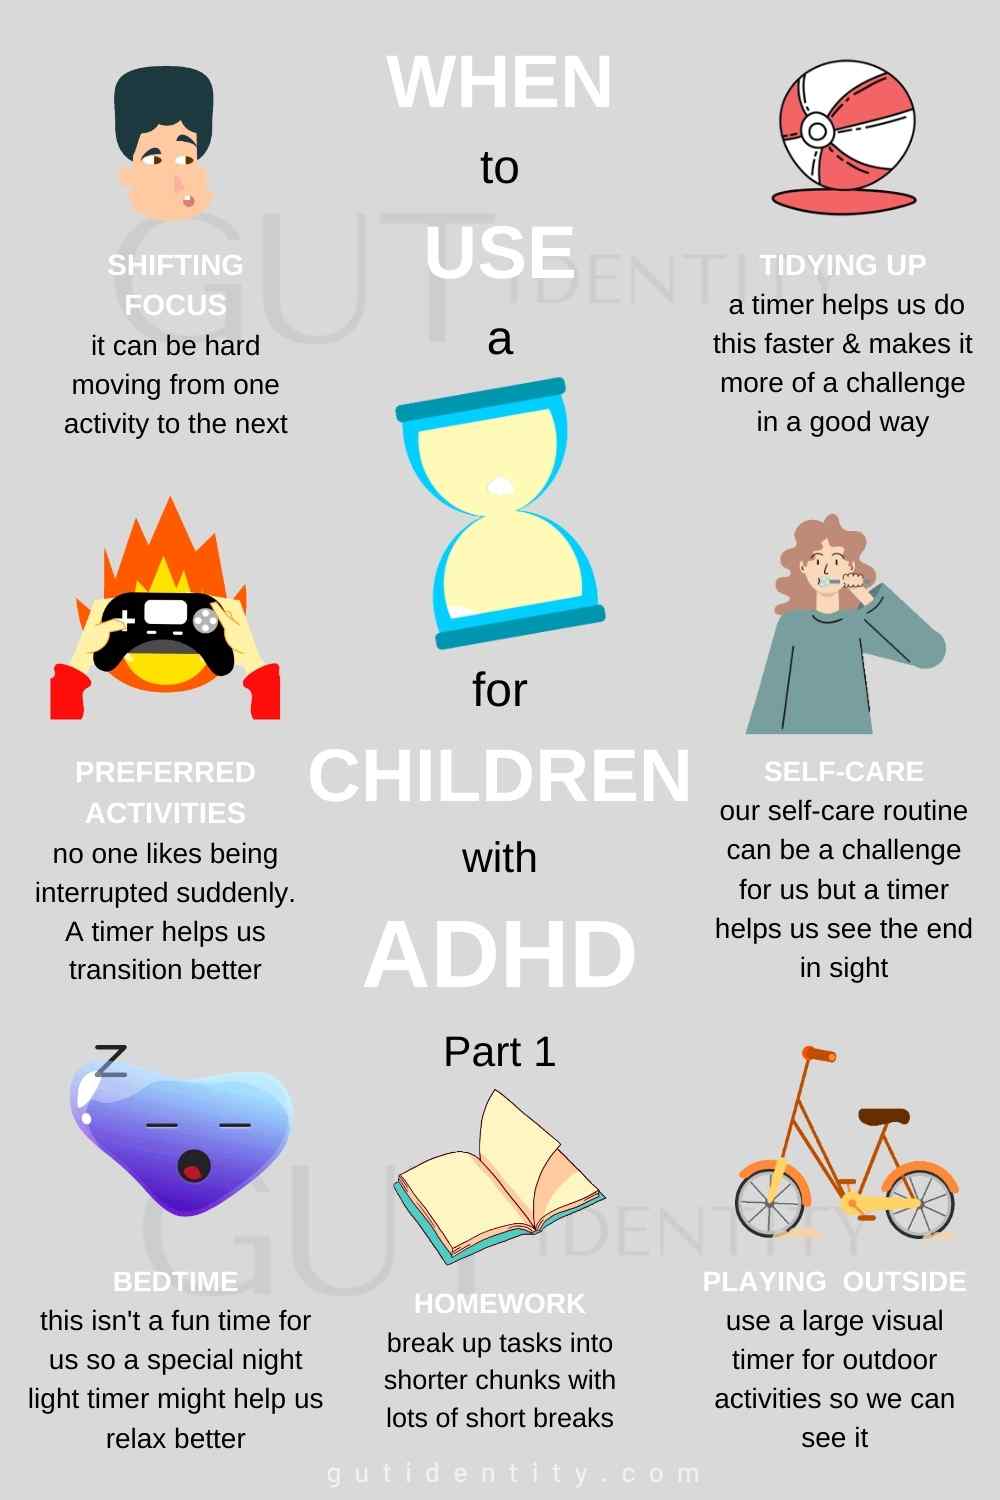 When to use a timer for children with ADHD by Gutidentity